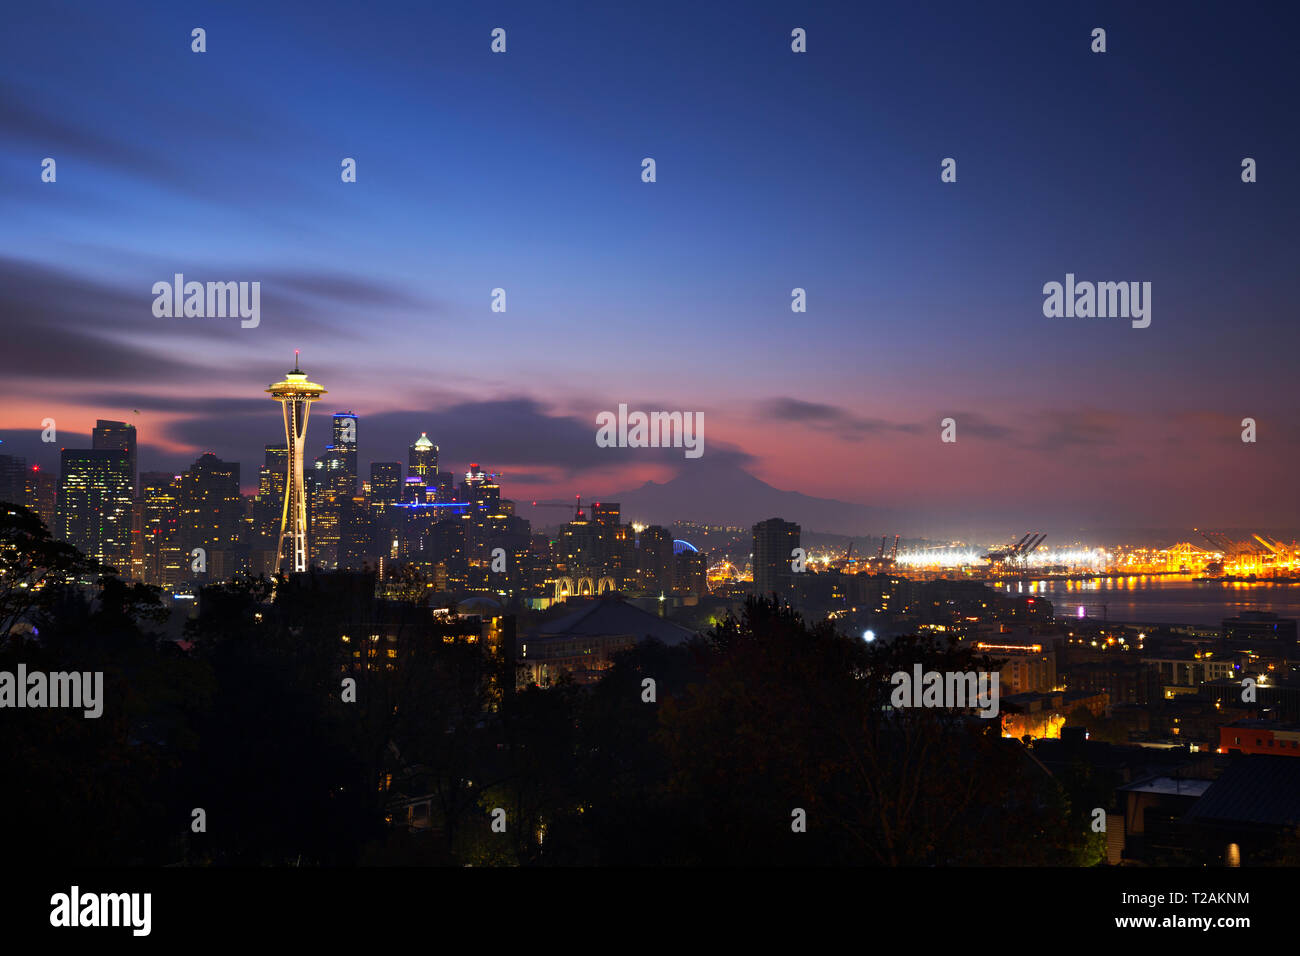 WA16102-00...WASHINGTON - The Space Needle and the highrises of downtown Seattle from Kerry Park. Stock Photo